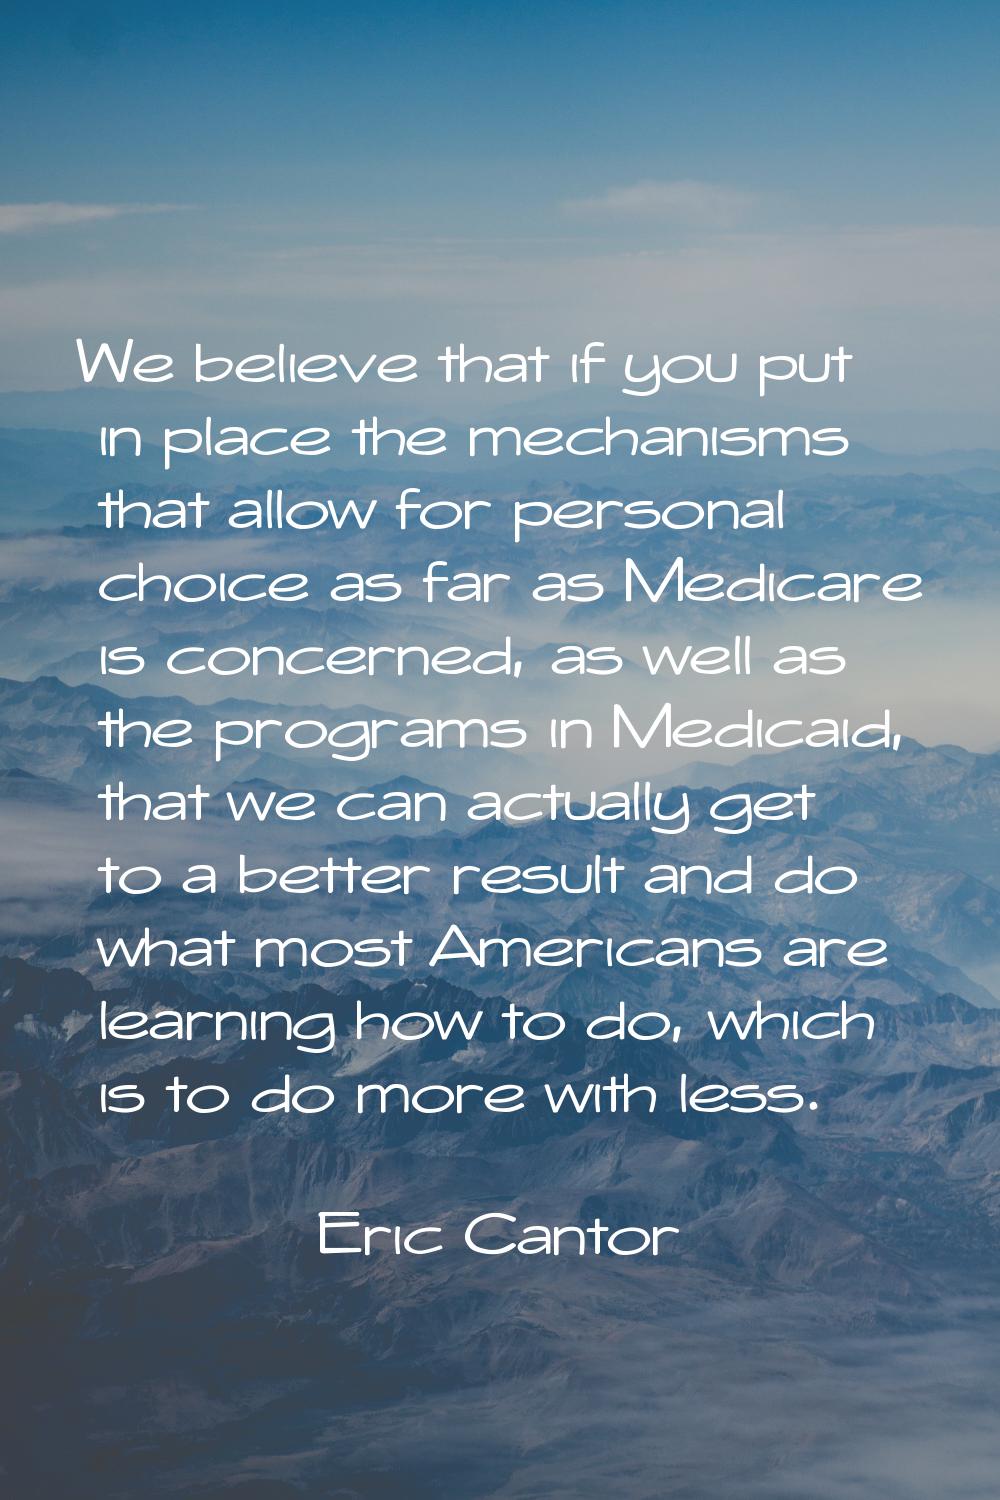 We believe that if you put in place the mechanisms that allow for personal choice as far as Medicar